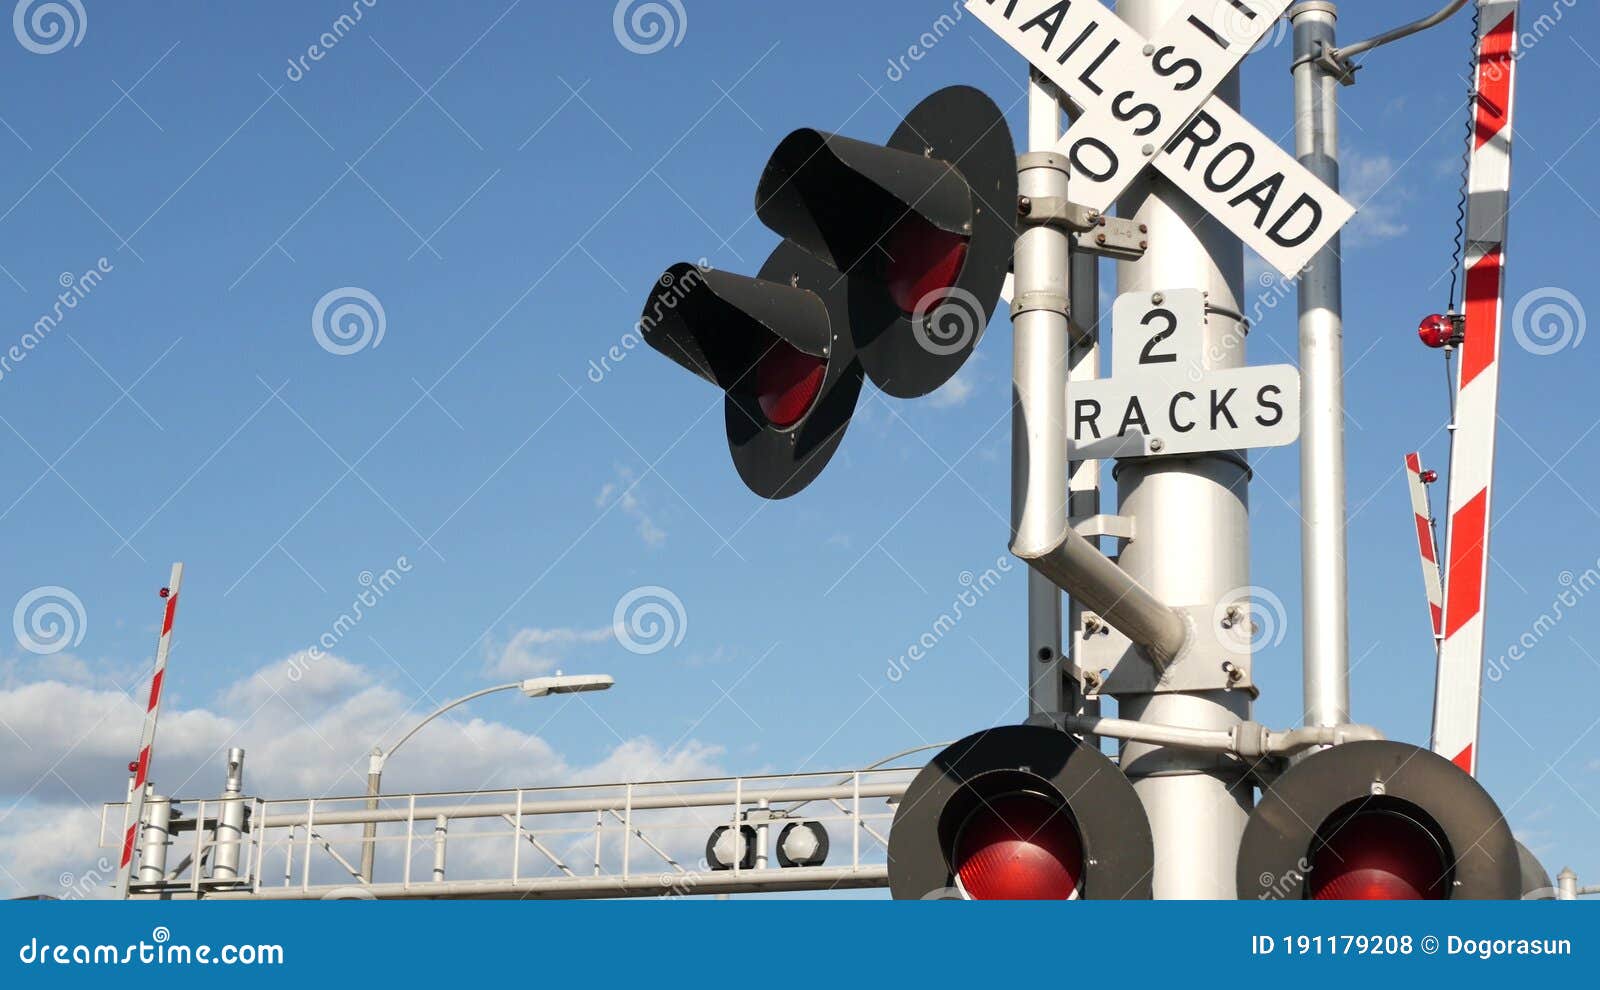 Level Crossing Warning Signal In Usa Crossbuck Notice And Red Traffic Light On Rail Road Intersection In California Railway Stock Photo Image Of Intersection Abstract